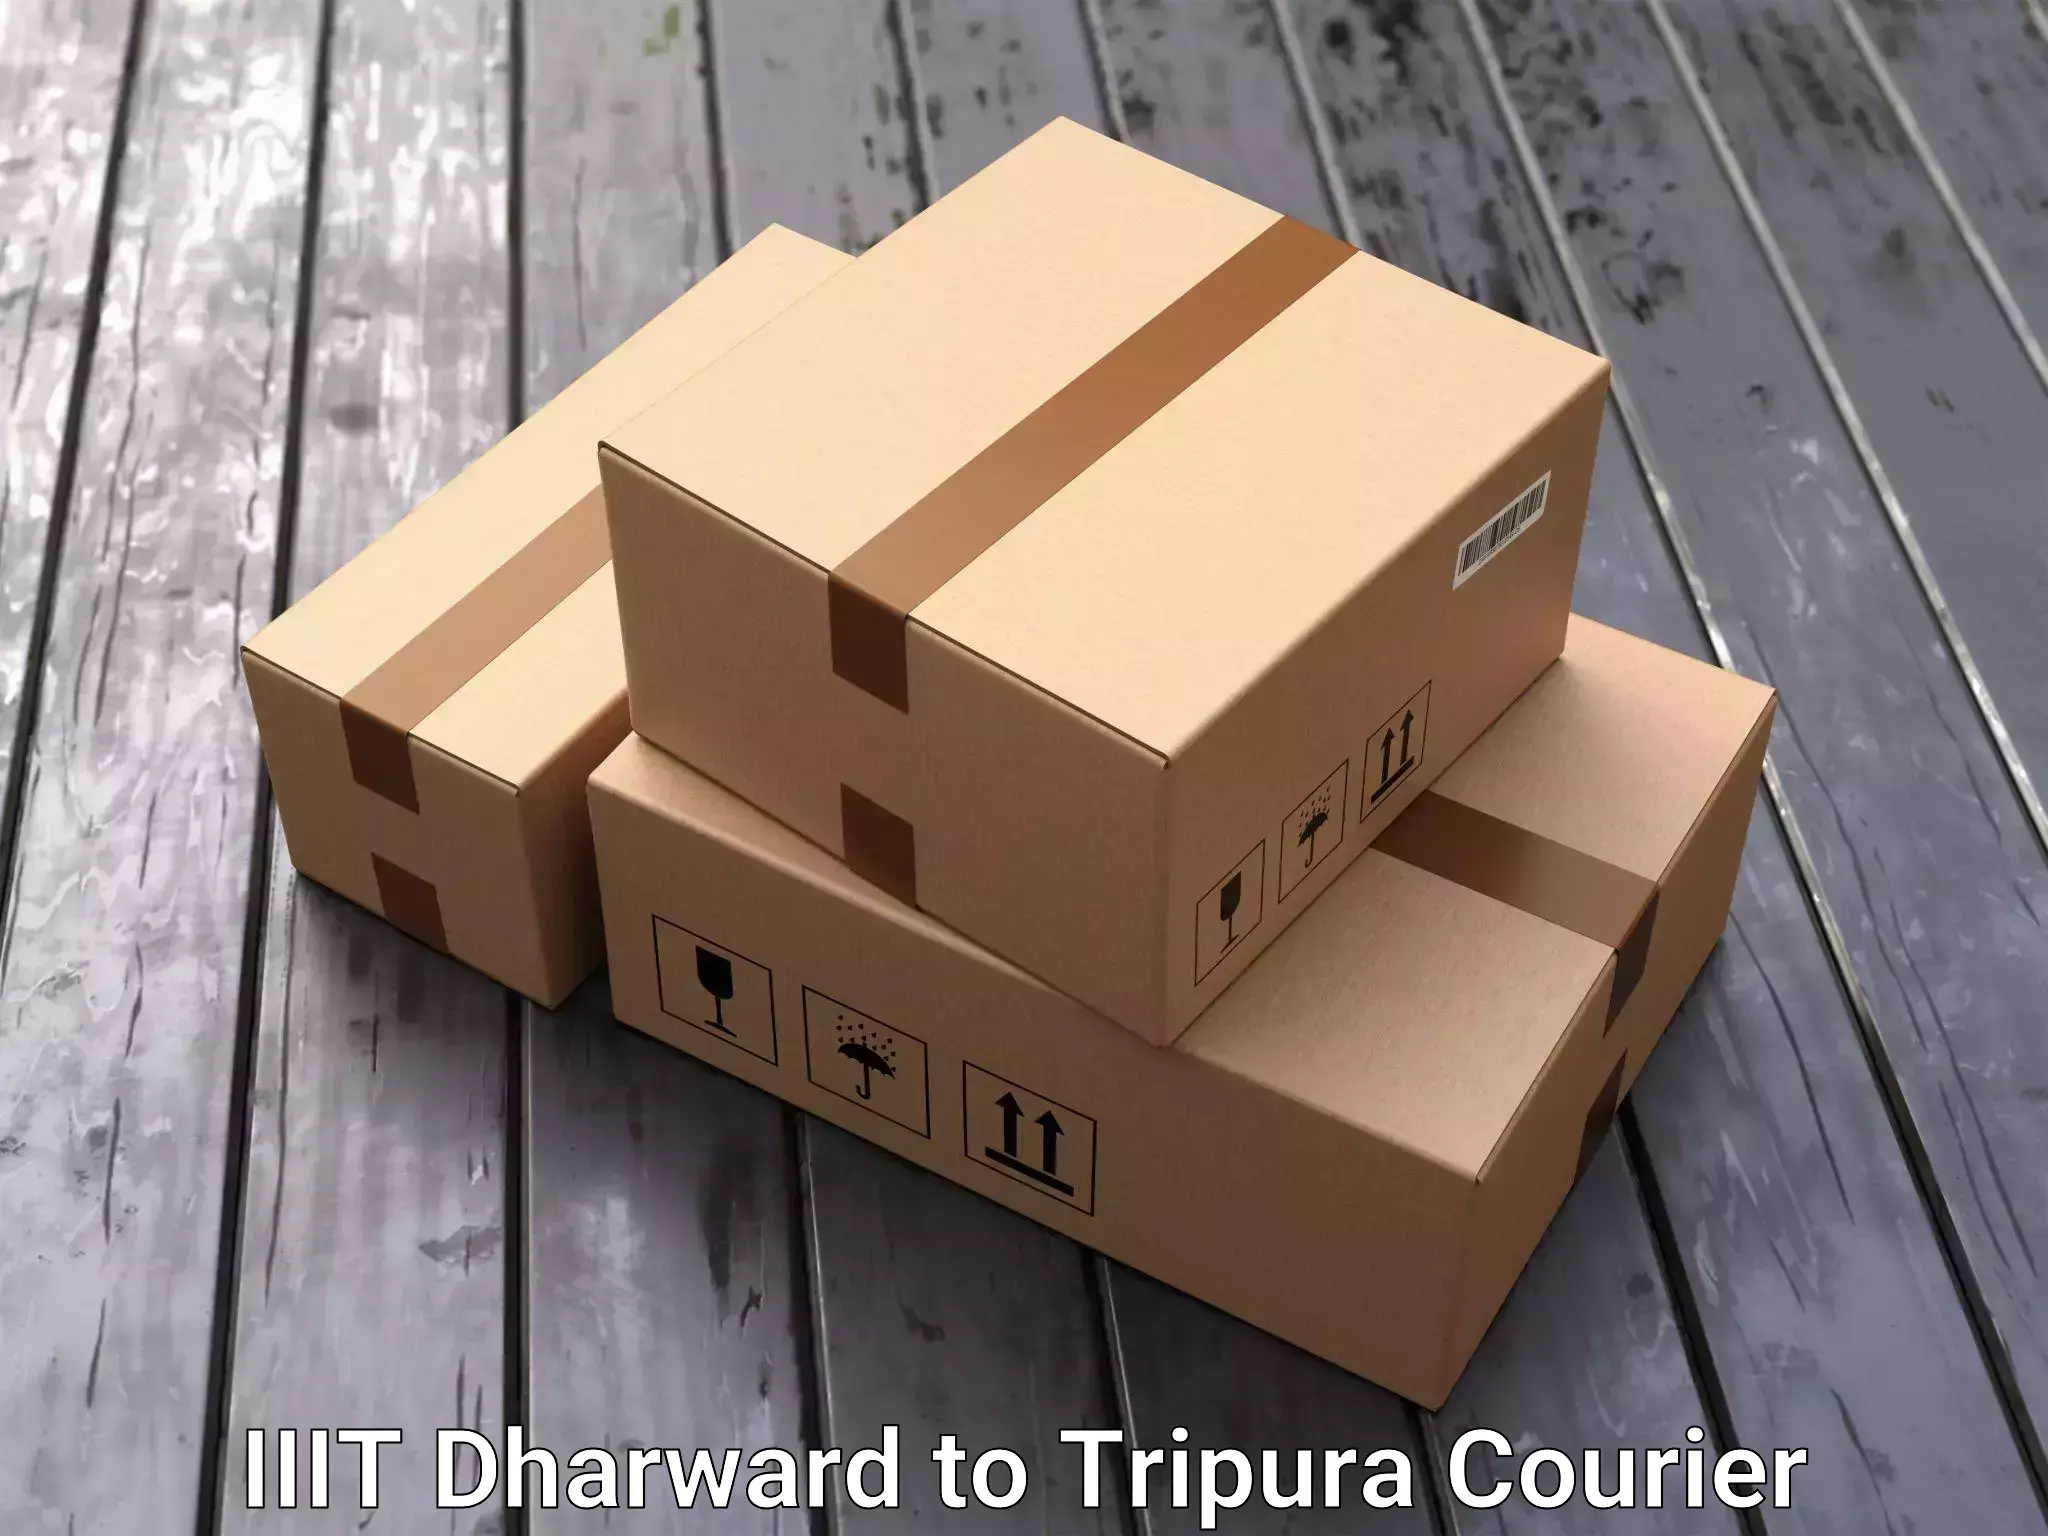 Professional movers and packers IIIT Dharward to Tripura